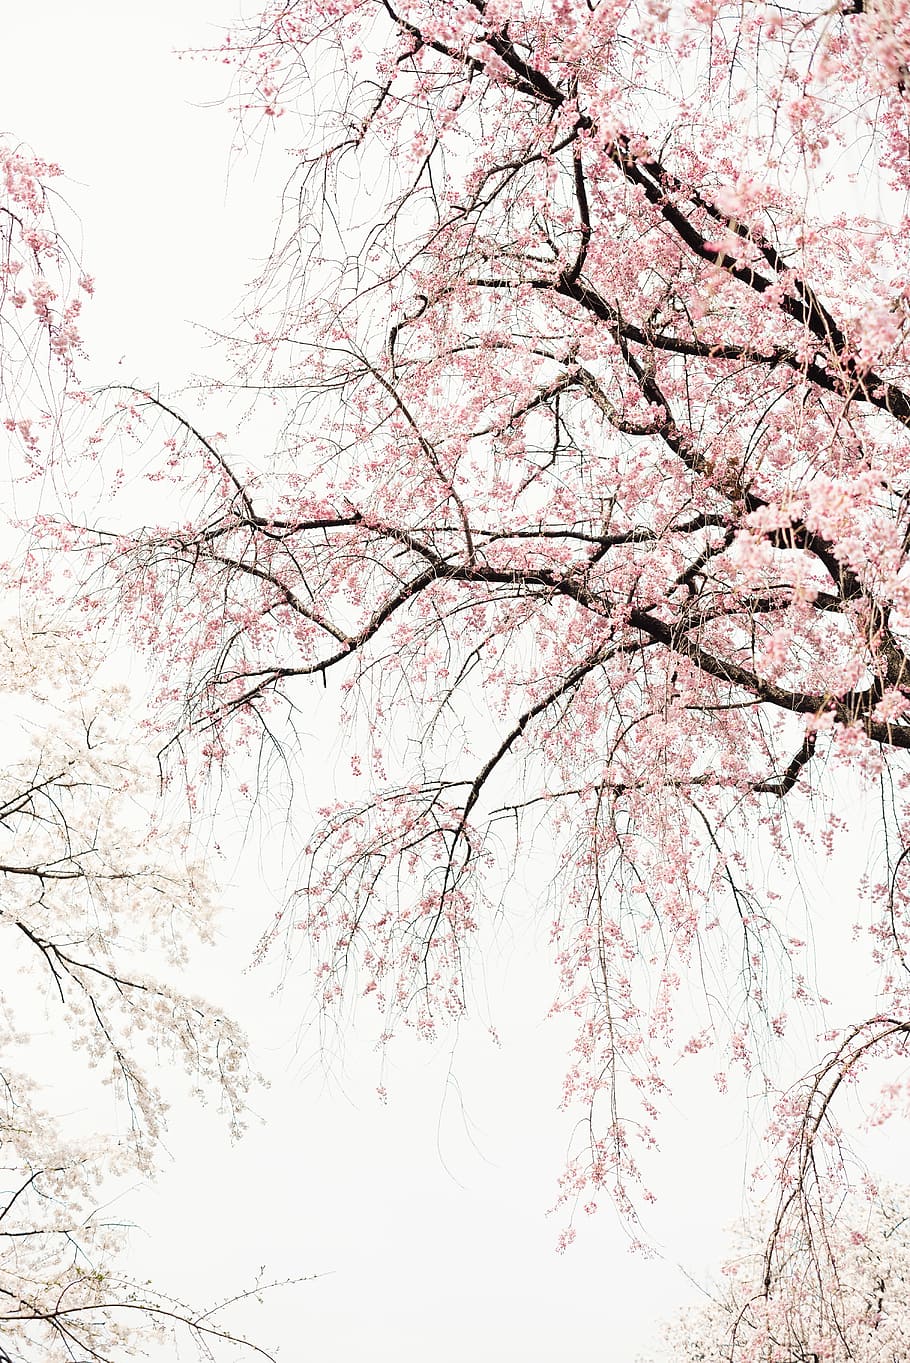 black and white trees, pink leafed tree, flower, branch, sky